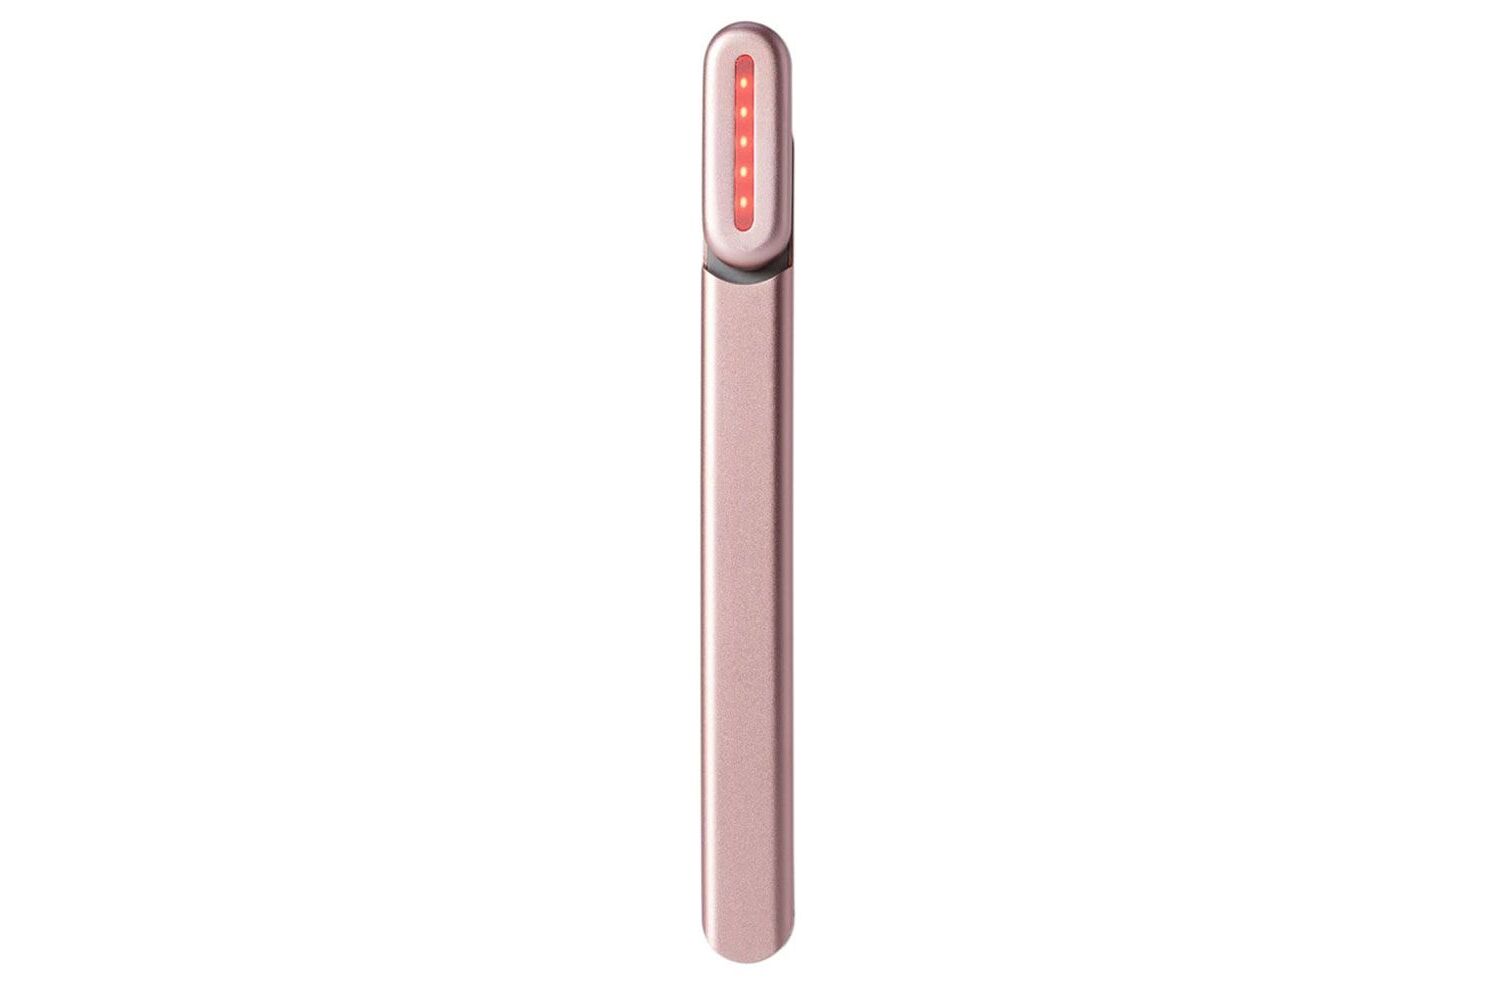 18-benefits-of-using-a-light-therapy-wand